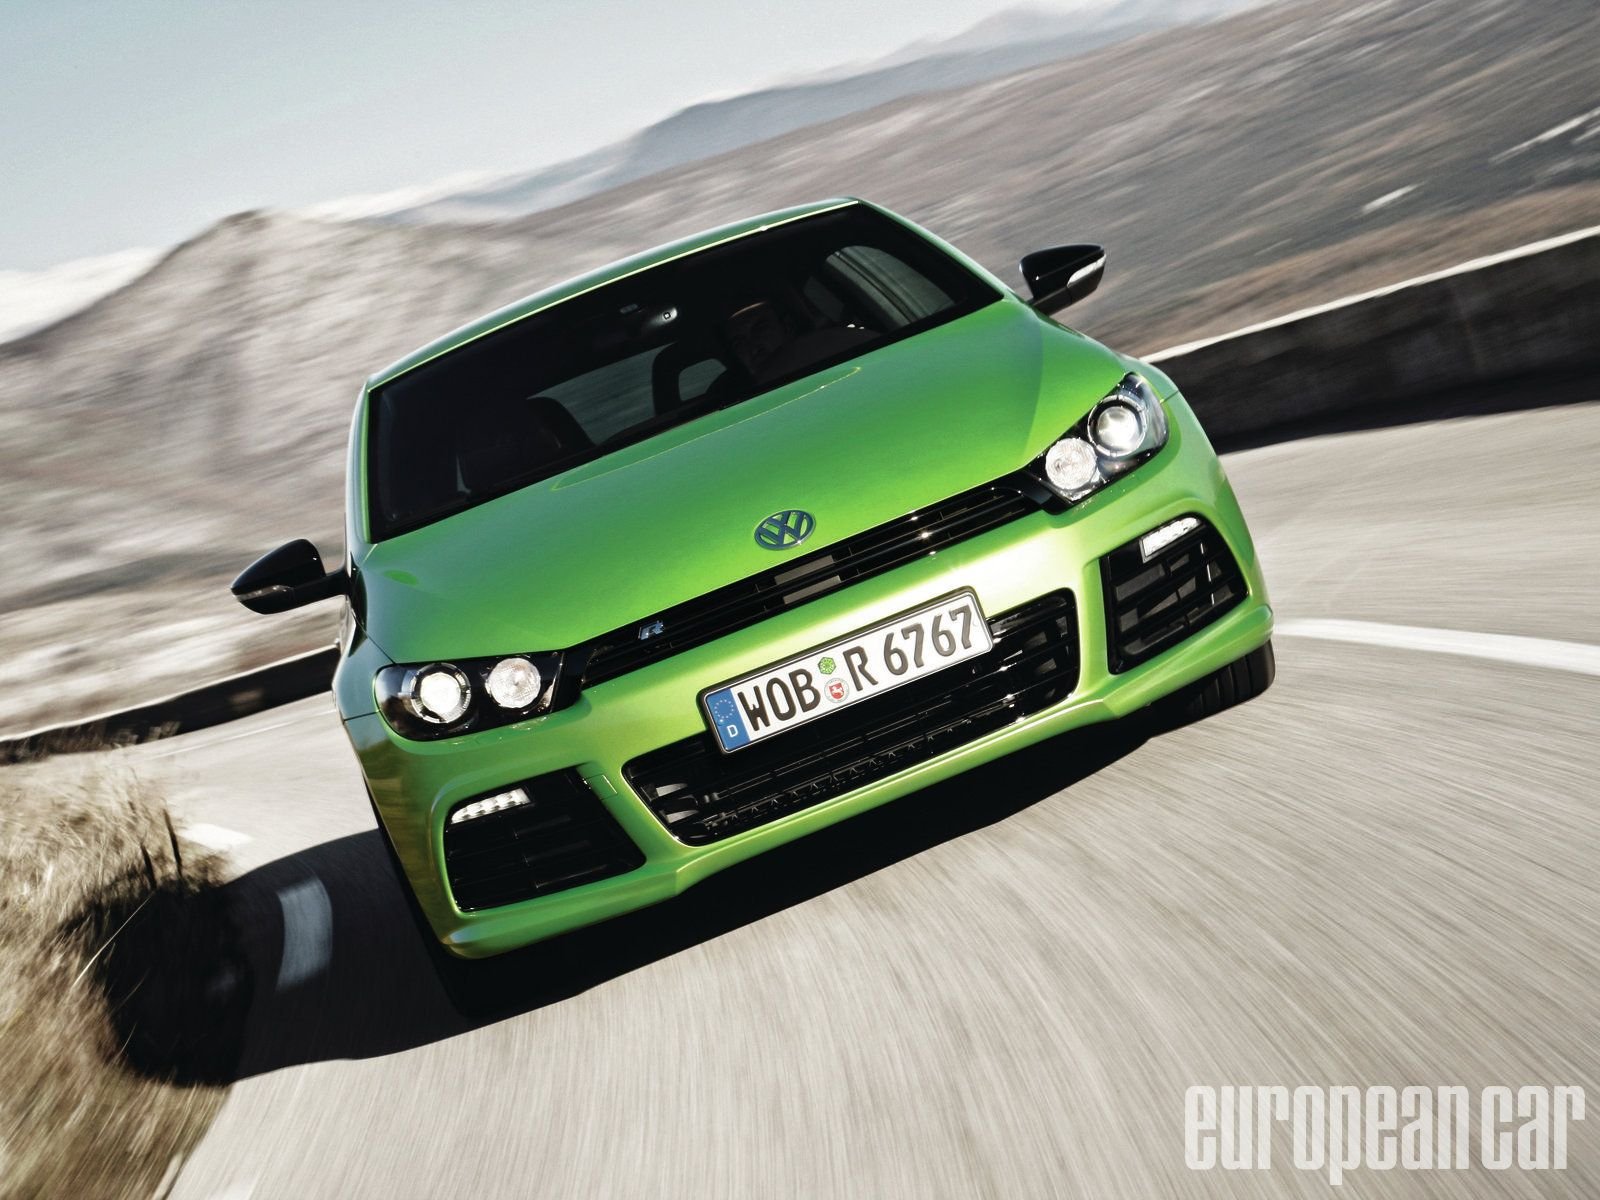 volkswagen, Scirocco, Cars, Coupe, Germany Wallpaper